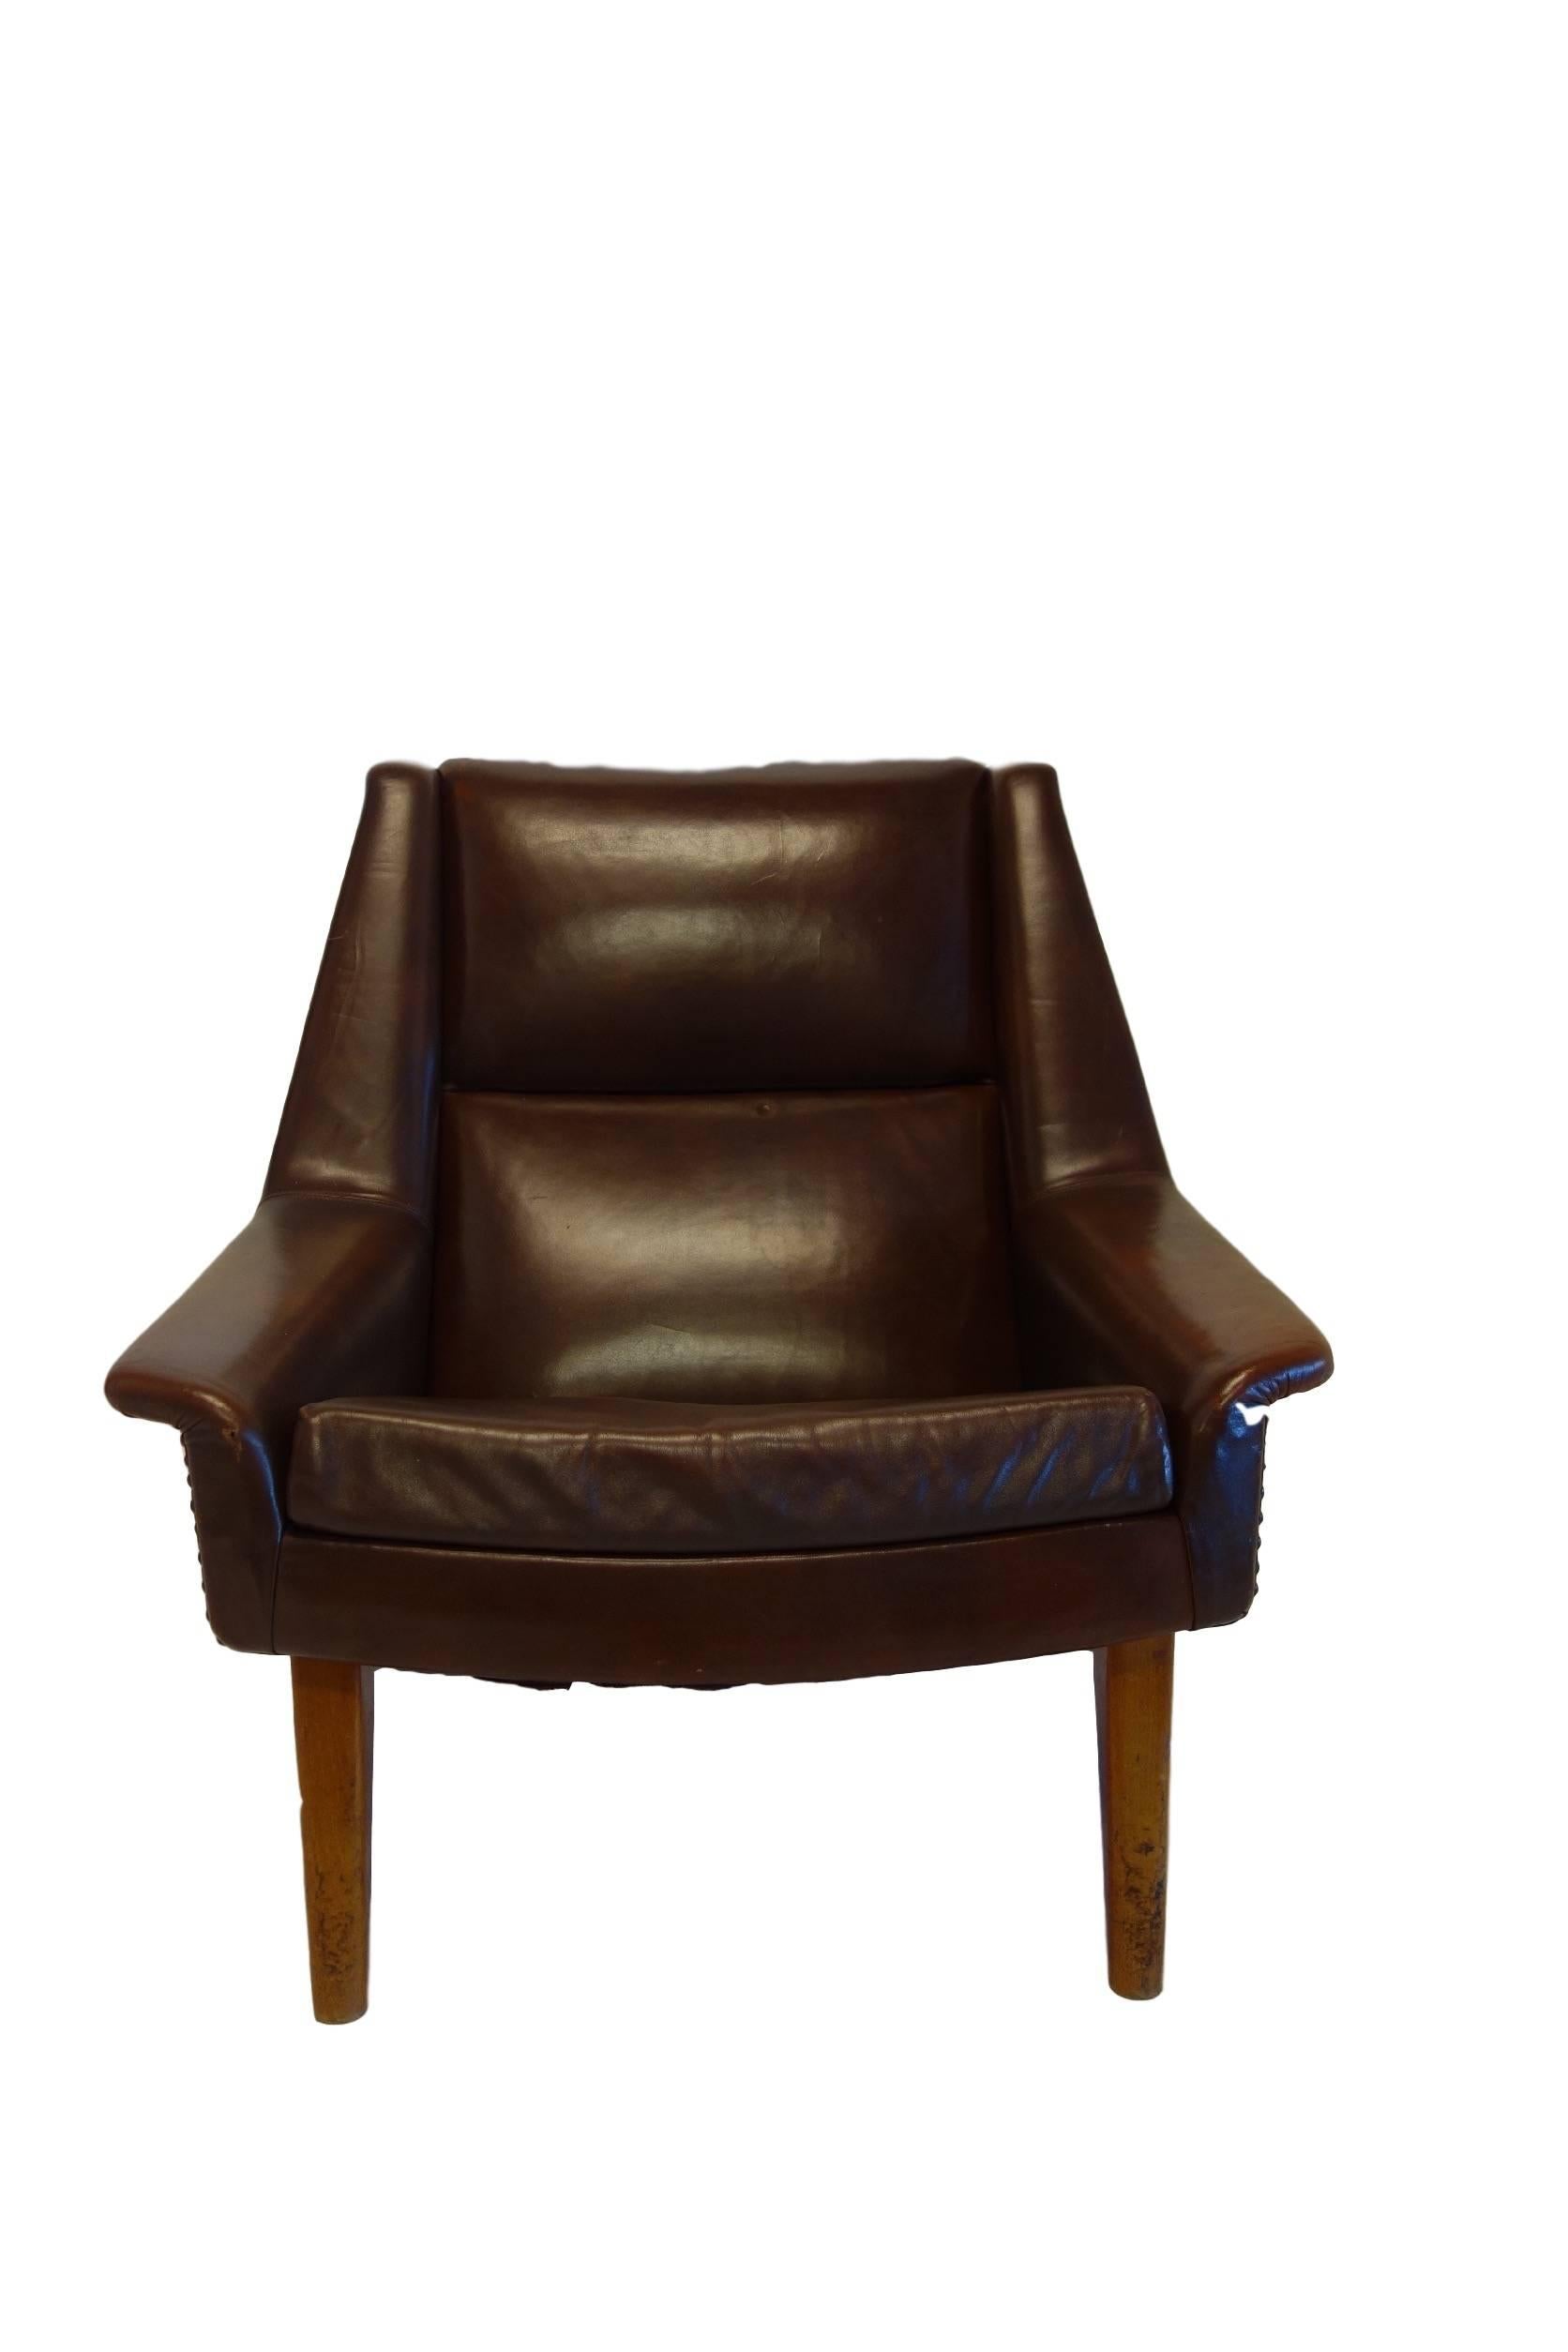 This is a handsome Danish Mid-Century Modern Folke Ohlsson chair in it's original brown leather upholstery. With it's deep seat and sleek lines this vintage chair is not only comfortable but attractive as well. The frame on the underside of the